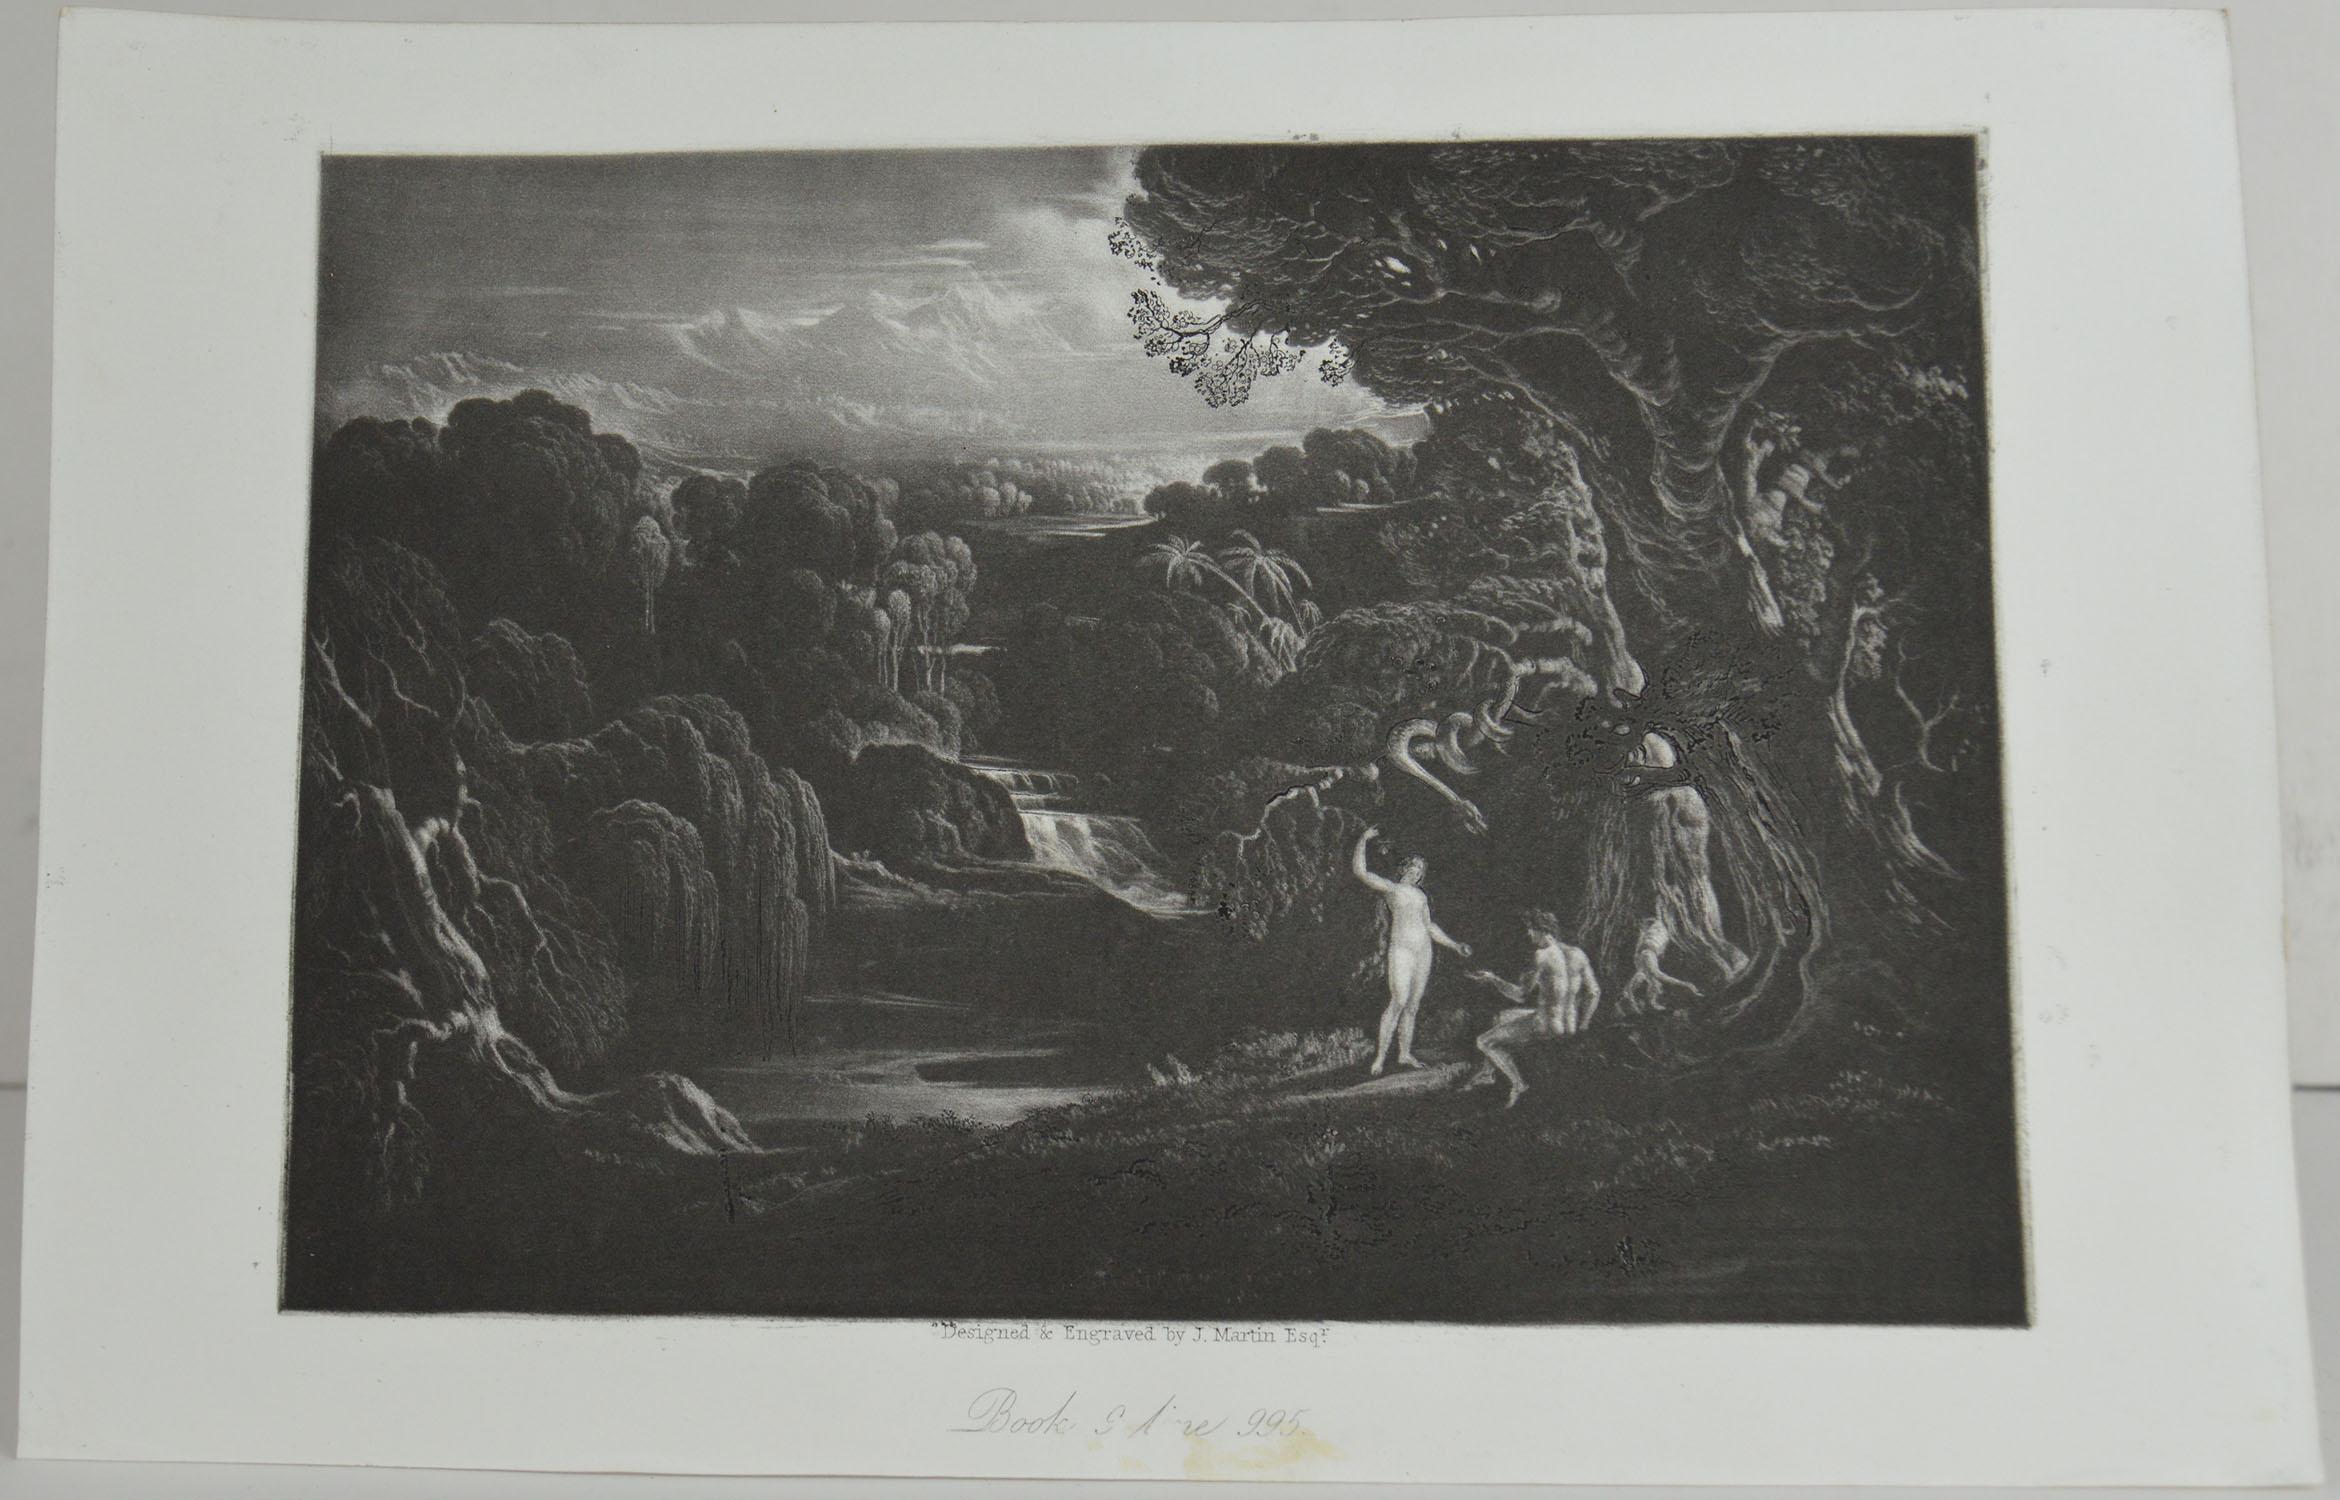 Sensational image by John Martin.

Titled: Eve Presenting The Forbidden Fruit To Adam

Drawn and engraved by John Martin. From the highly regarded Washbourne Publication of Milton's Paradise Lost, 1853.

Unframed.
 
  